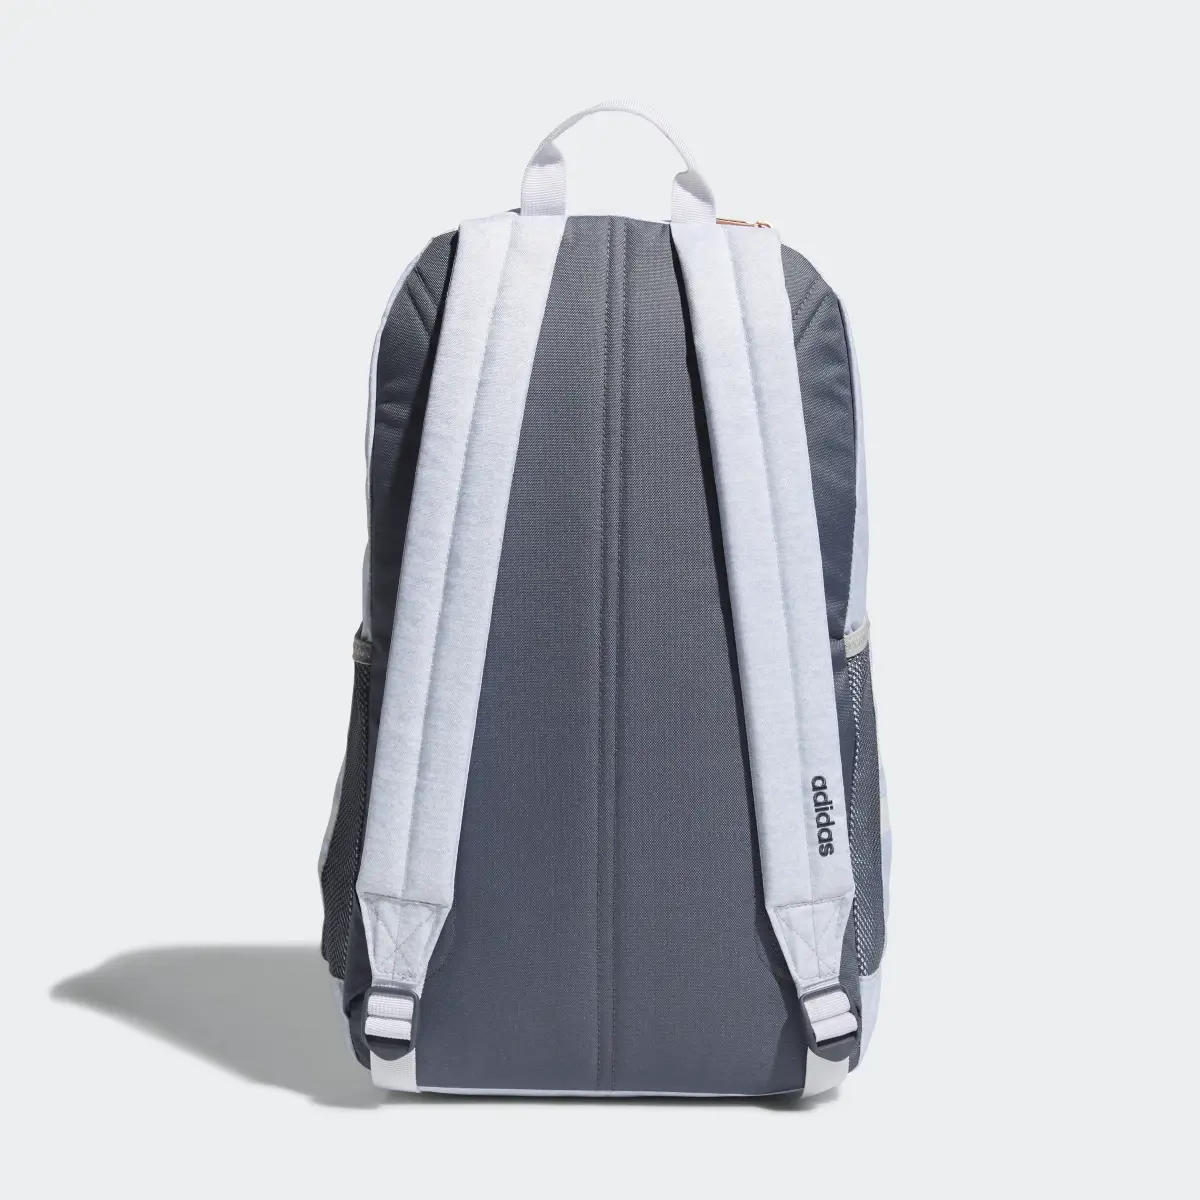 Adidas Classic 3-Stripes Backpack. 3